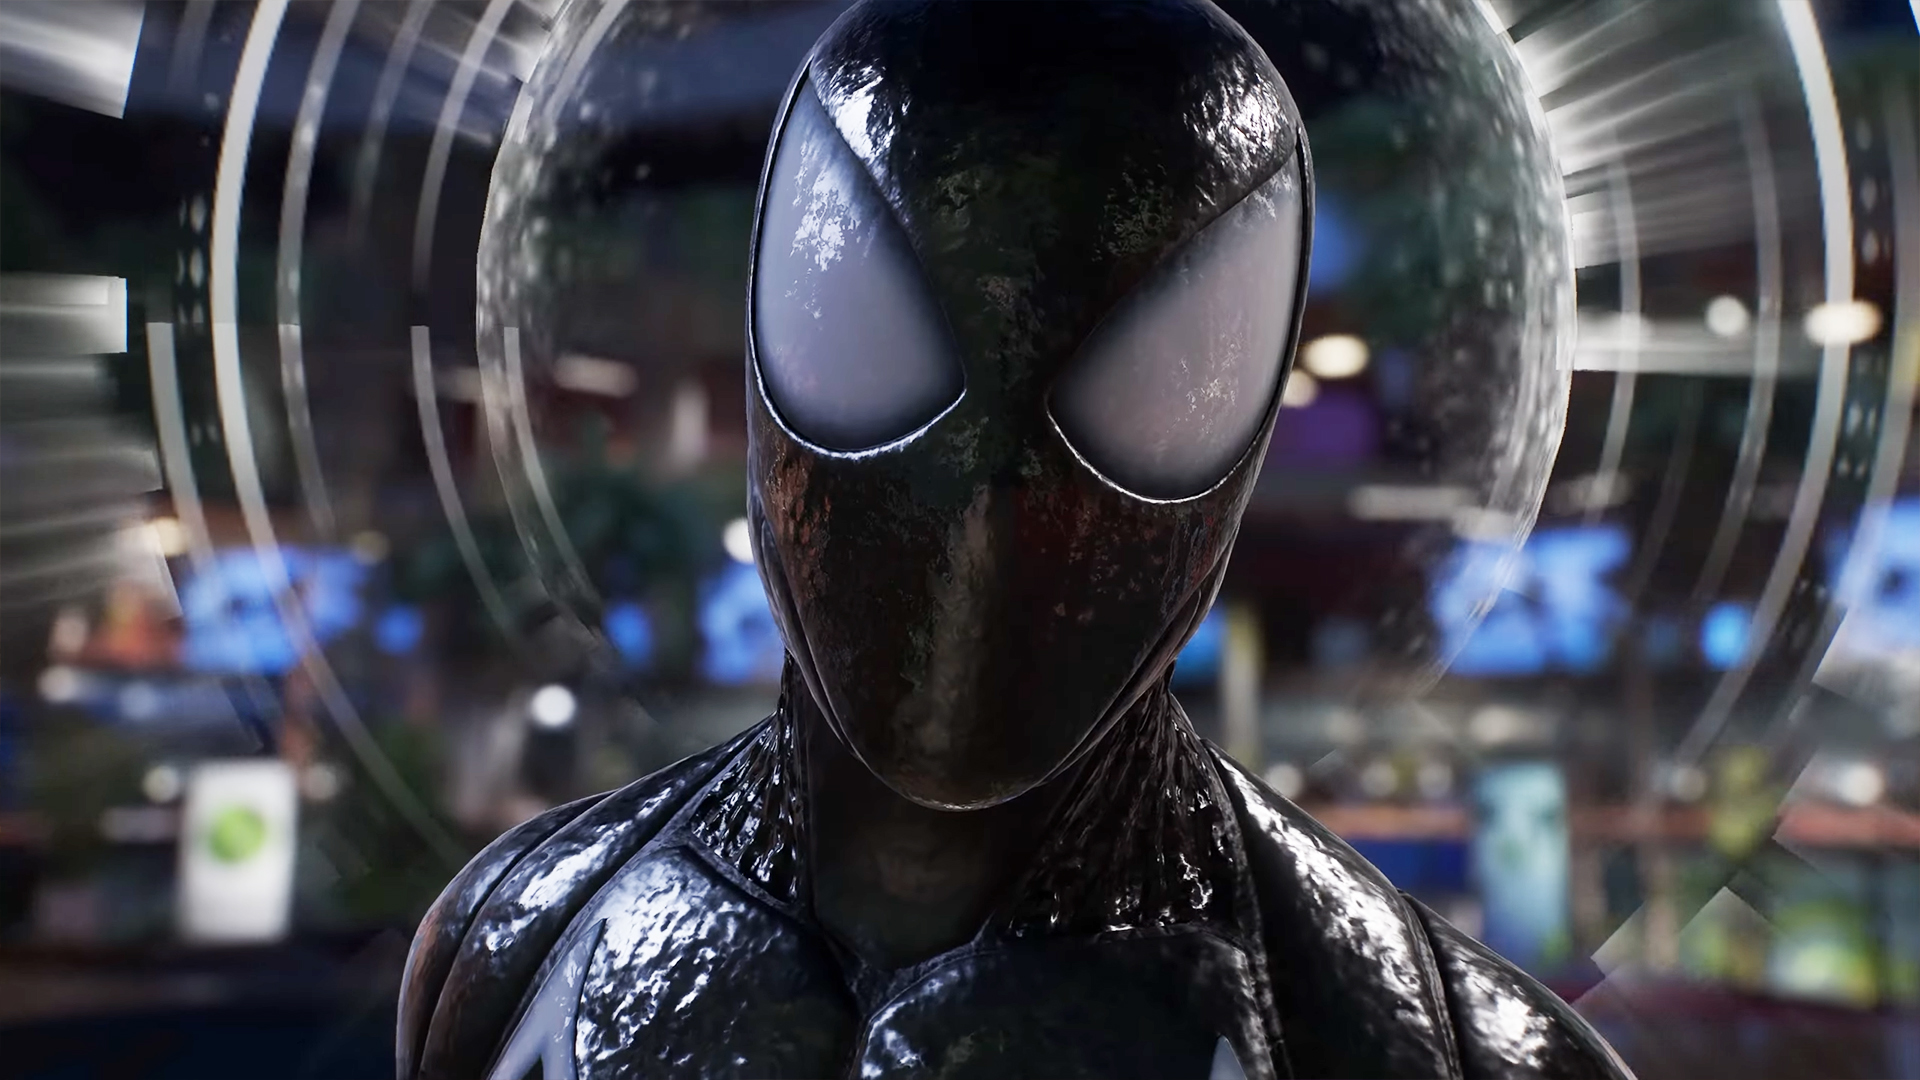 One of Spider-Man 2's biggest spoilers arrives courtesy of PlayStation